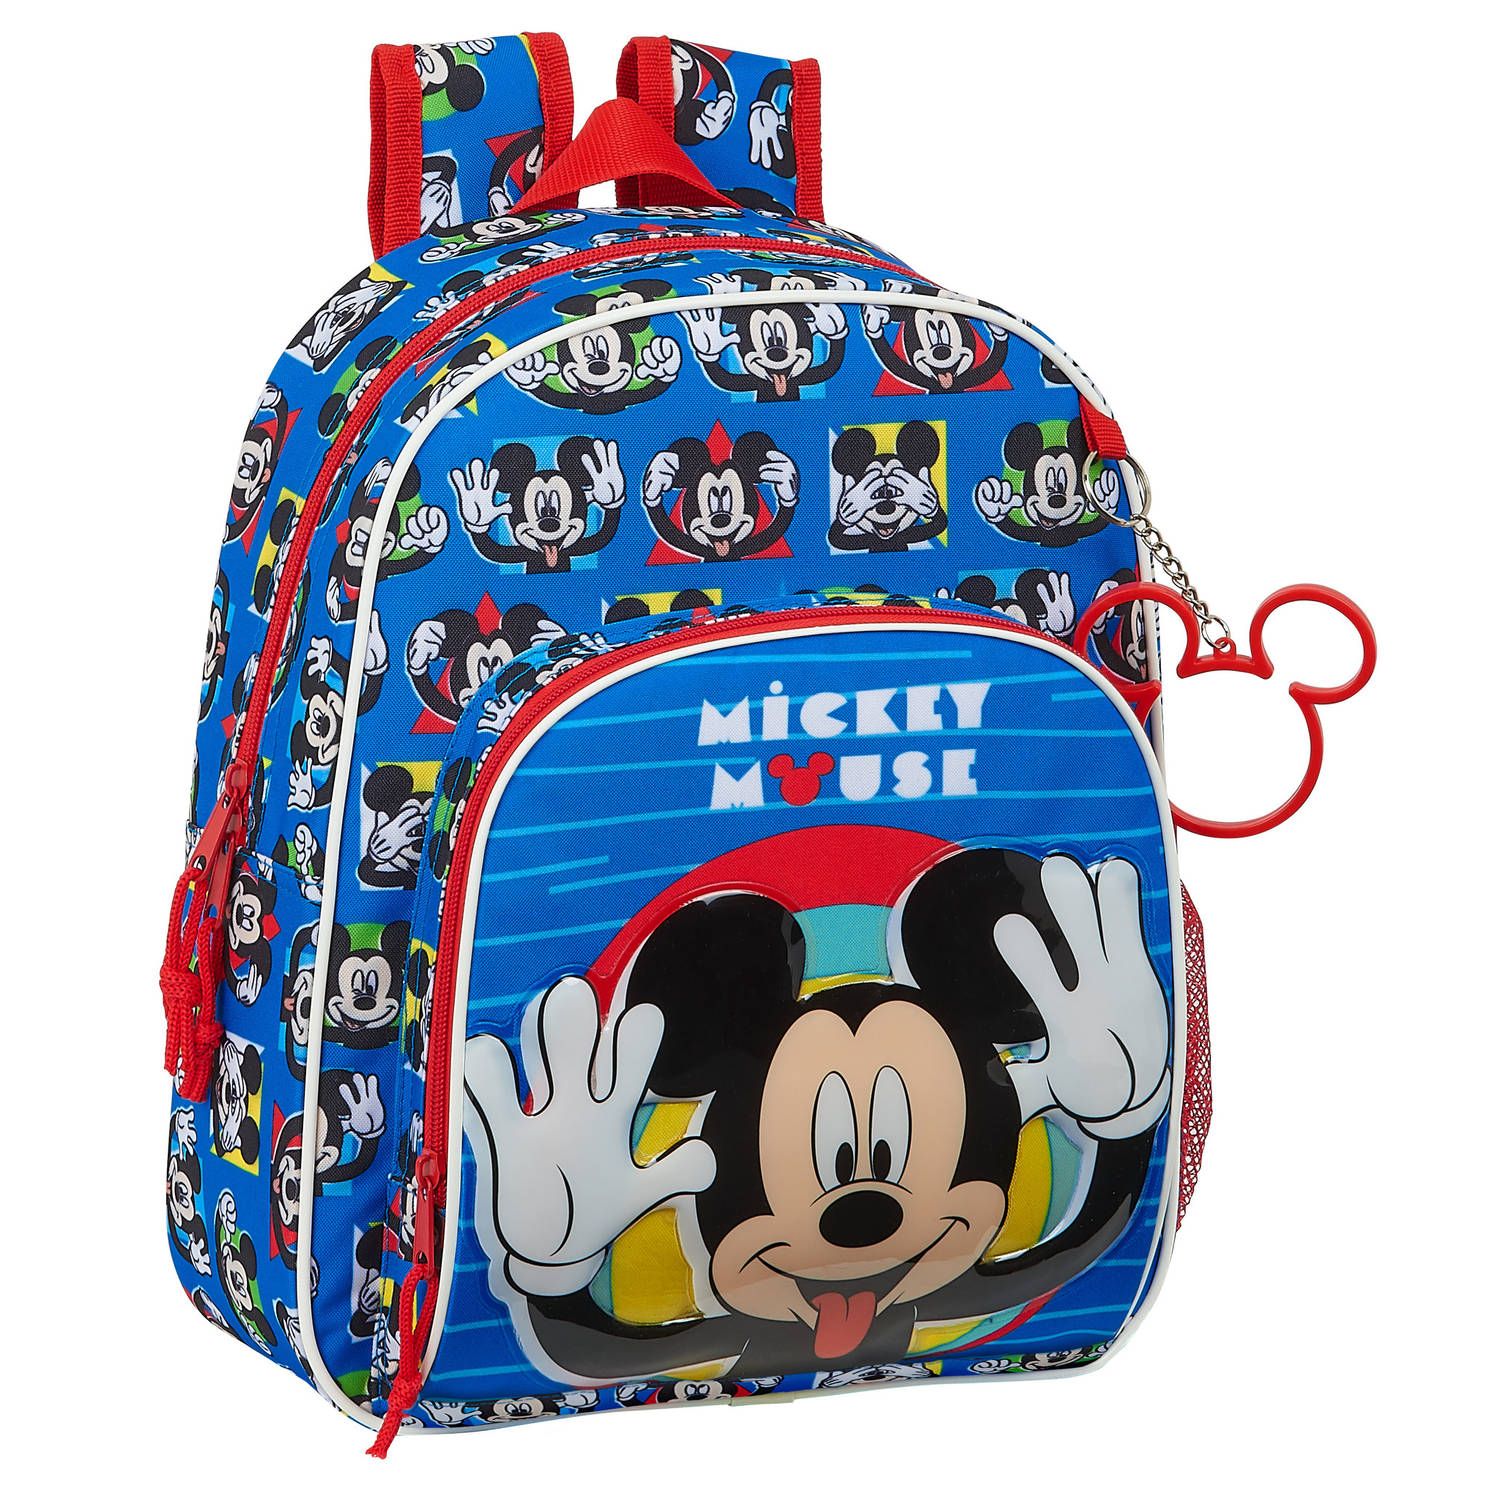 trimmen domein Conclusie Disney Mickey Mouse Rugzak Me Time - 34 x 28 x 10 cm - Polyester | Blokker